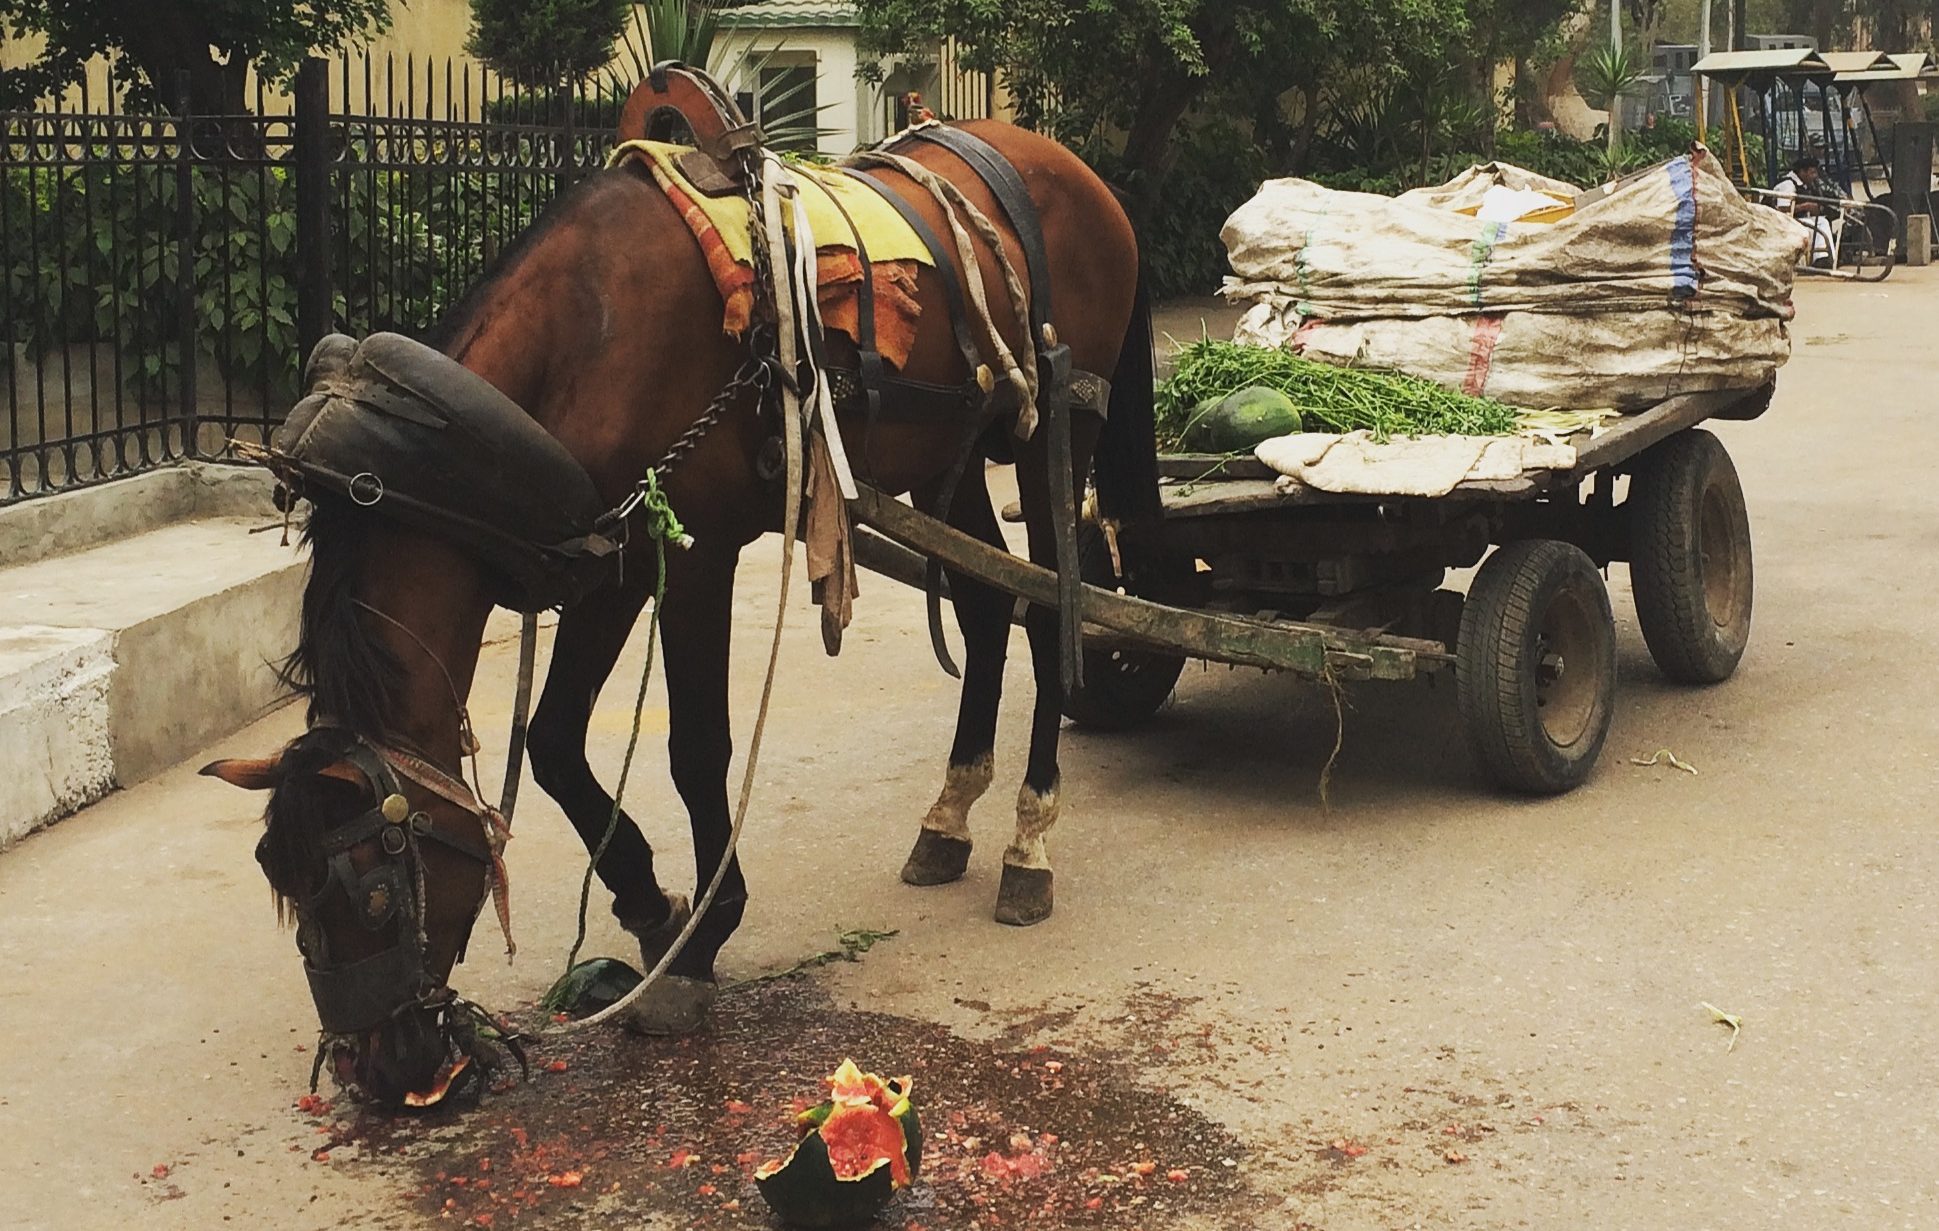 a photo or a horse and cart. The horse is eating a watermelon.